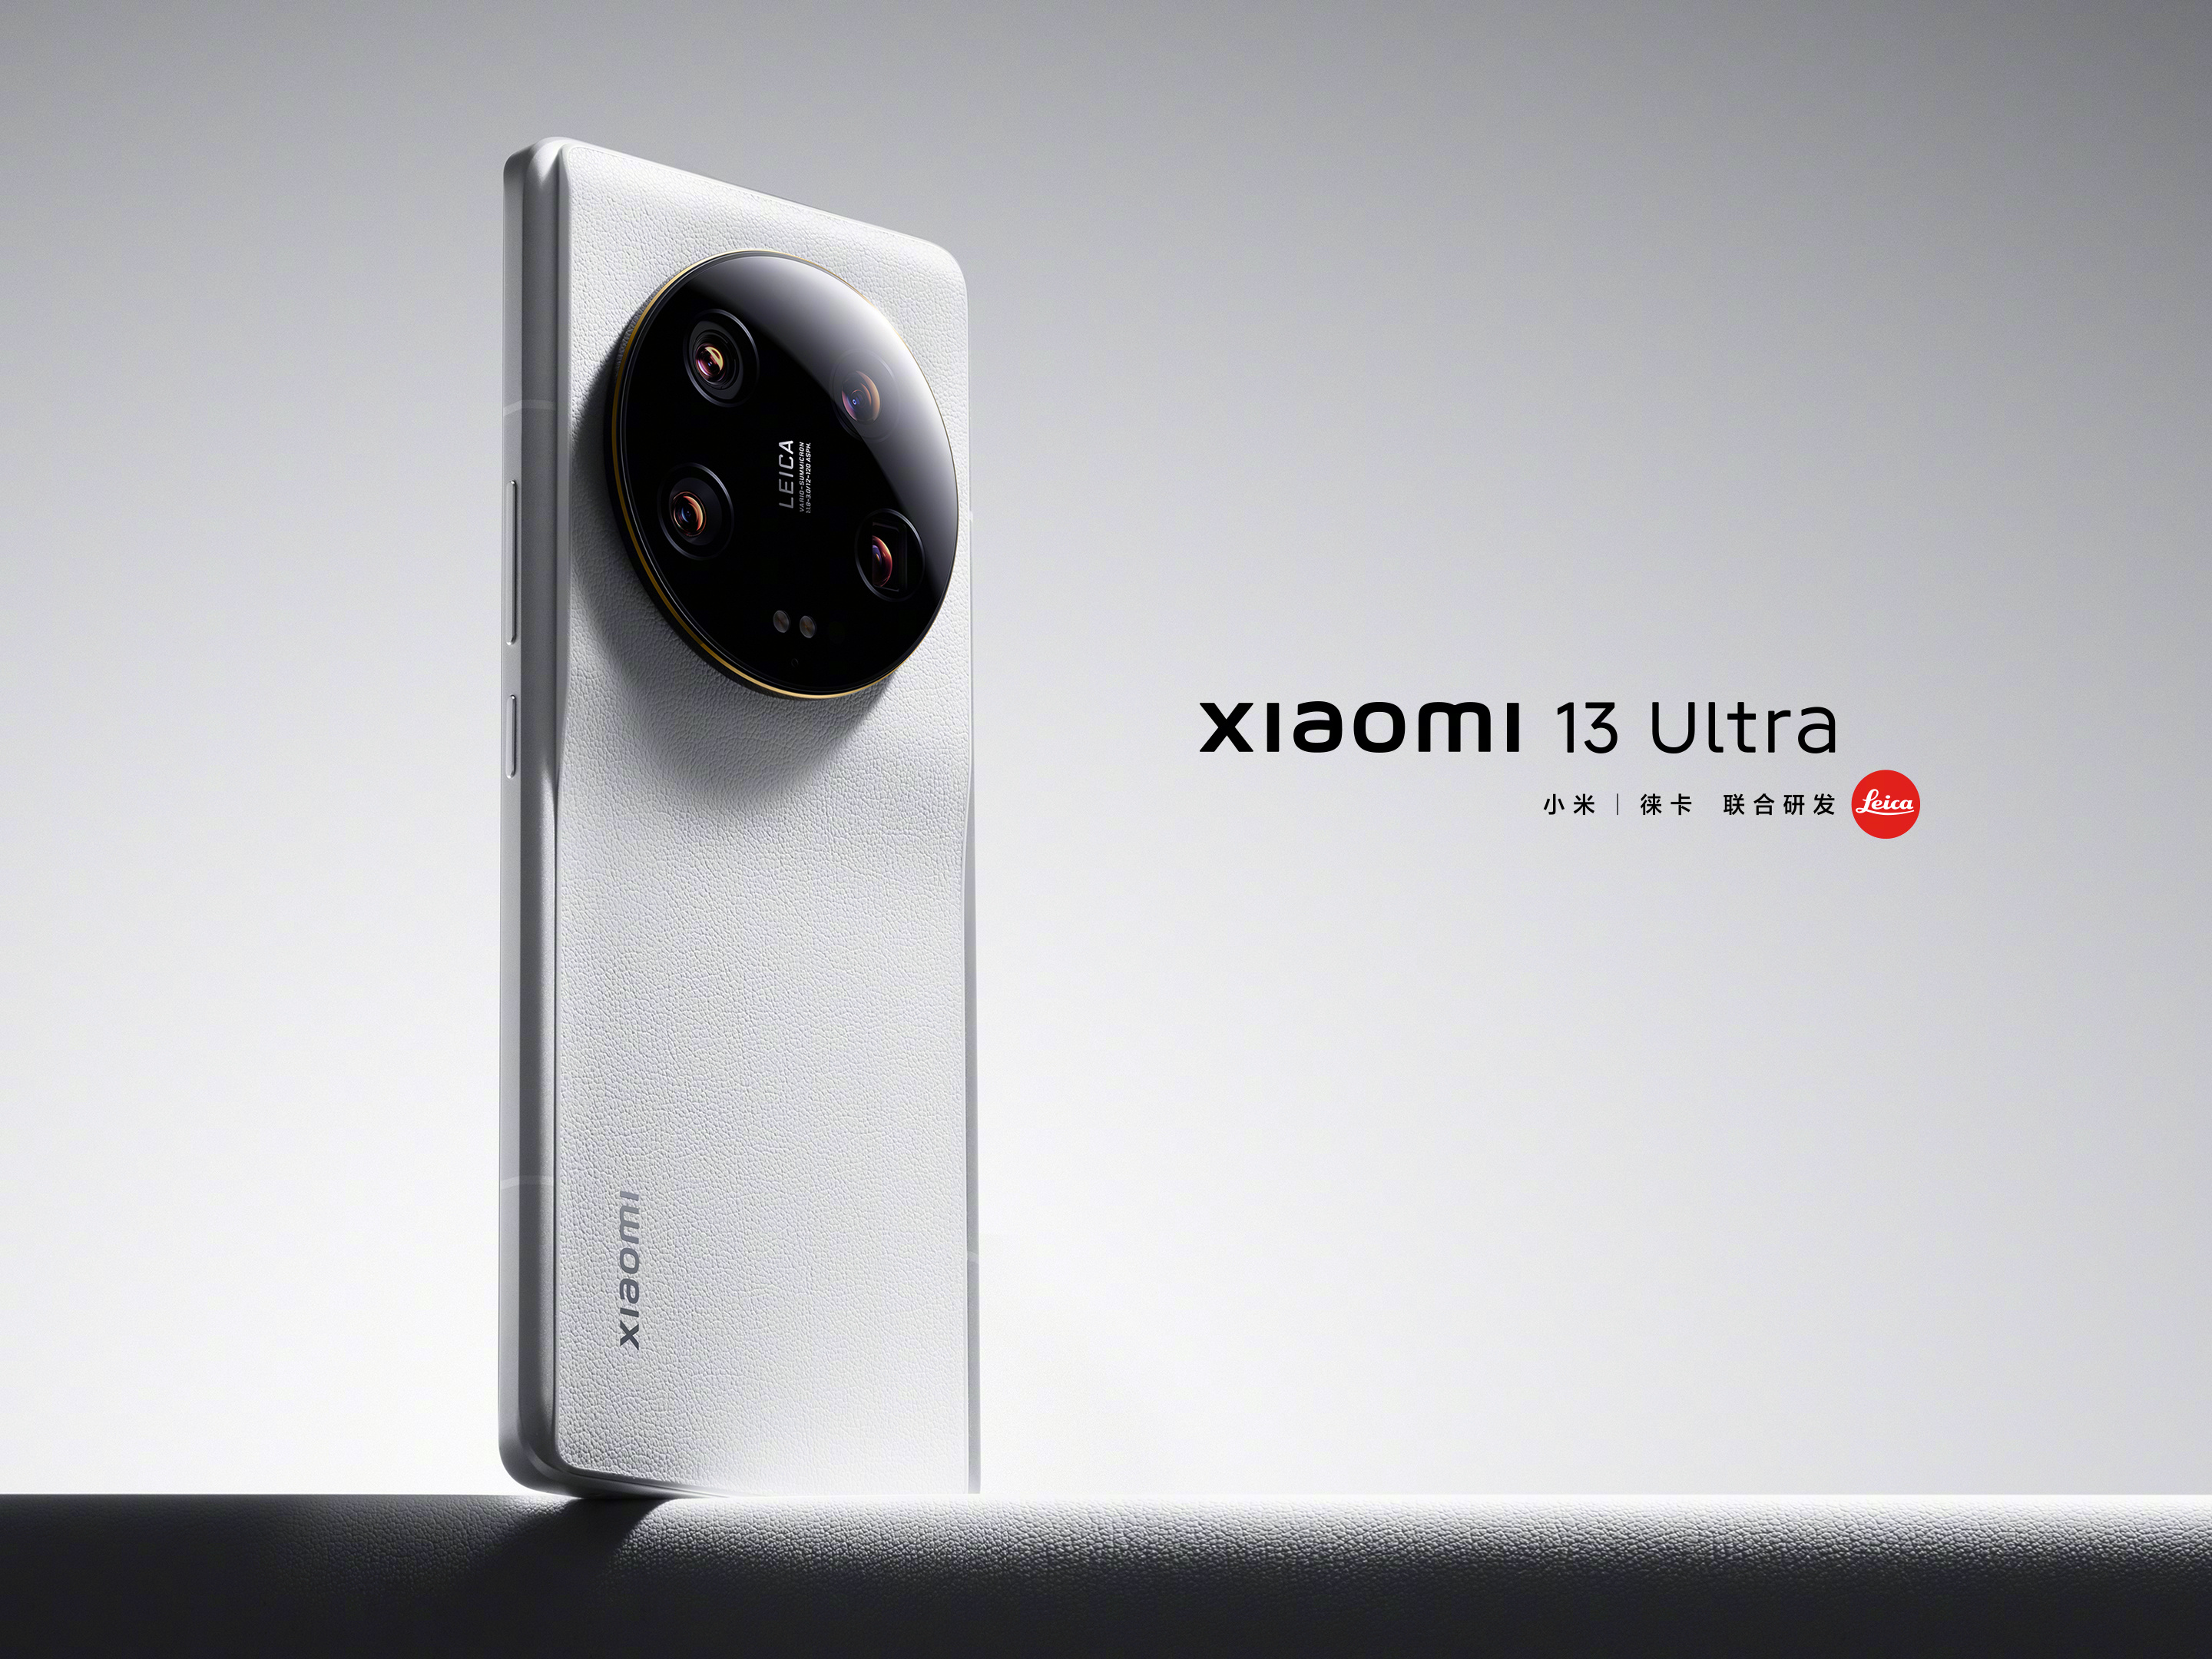 Before the launch: Xiaomi reveals what the Xiaomi 13 Ultra flagship will look like with a giant Leica camera